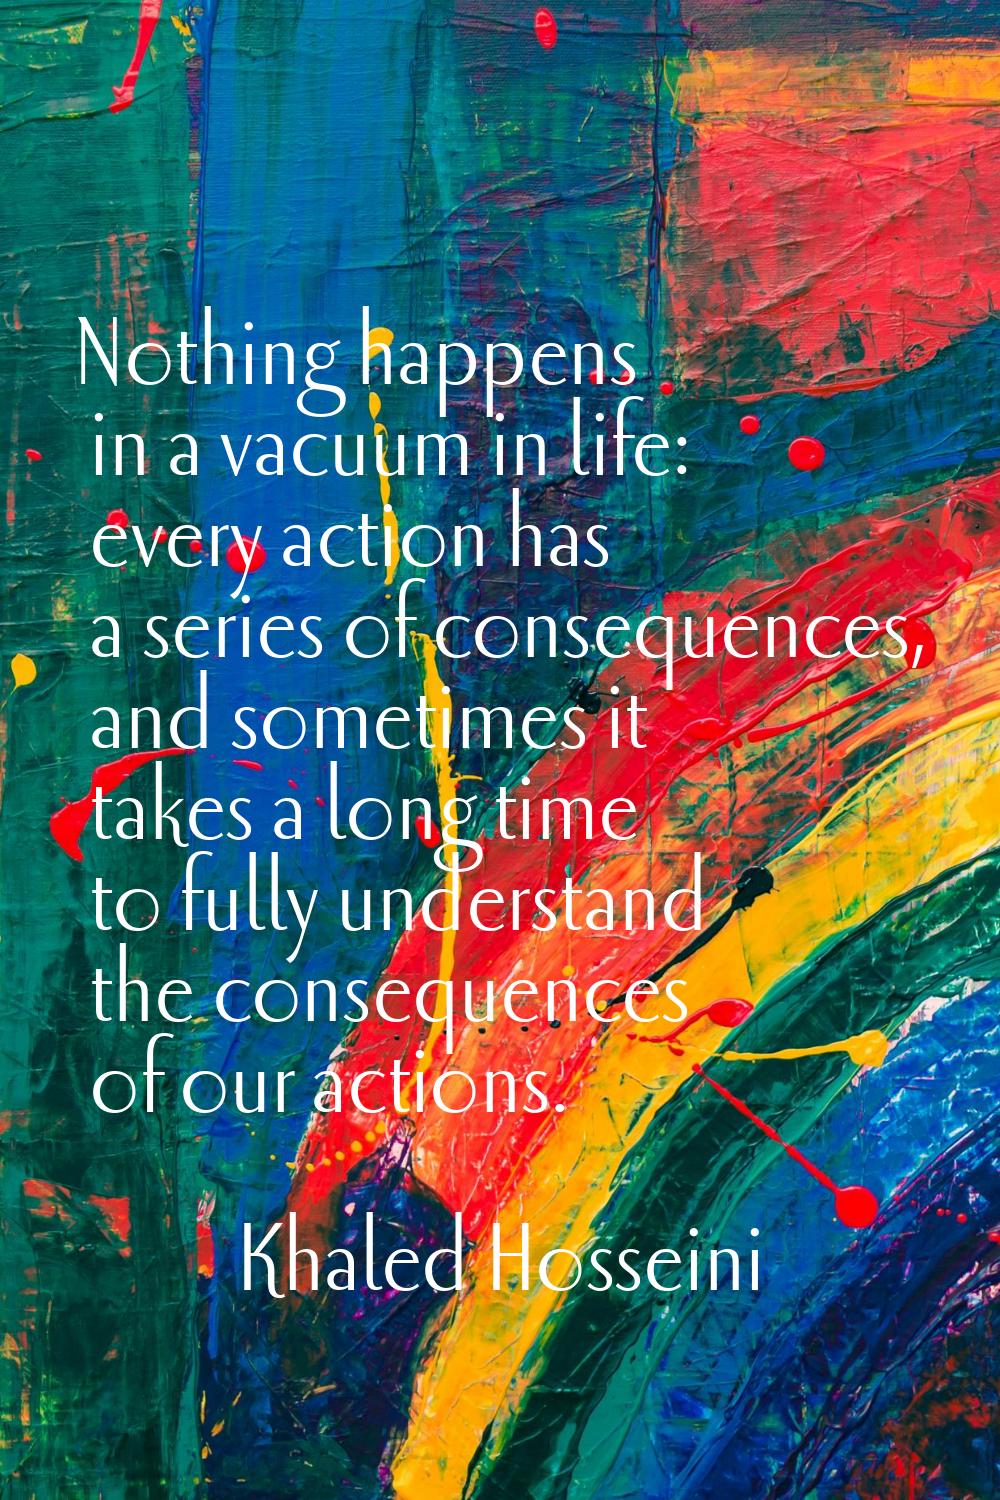 Nothing happens in a vacuum in life: every action has a series of consequences, and sometimes it ta